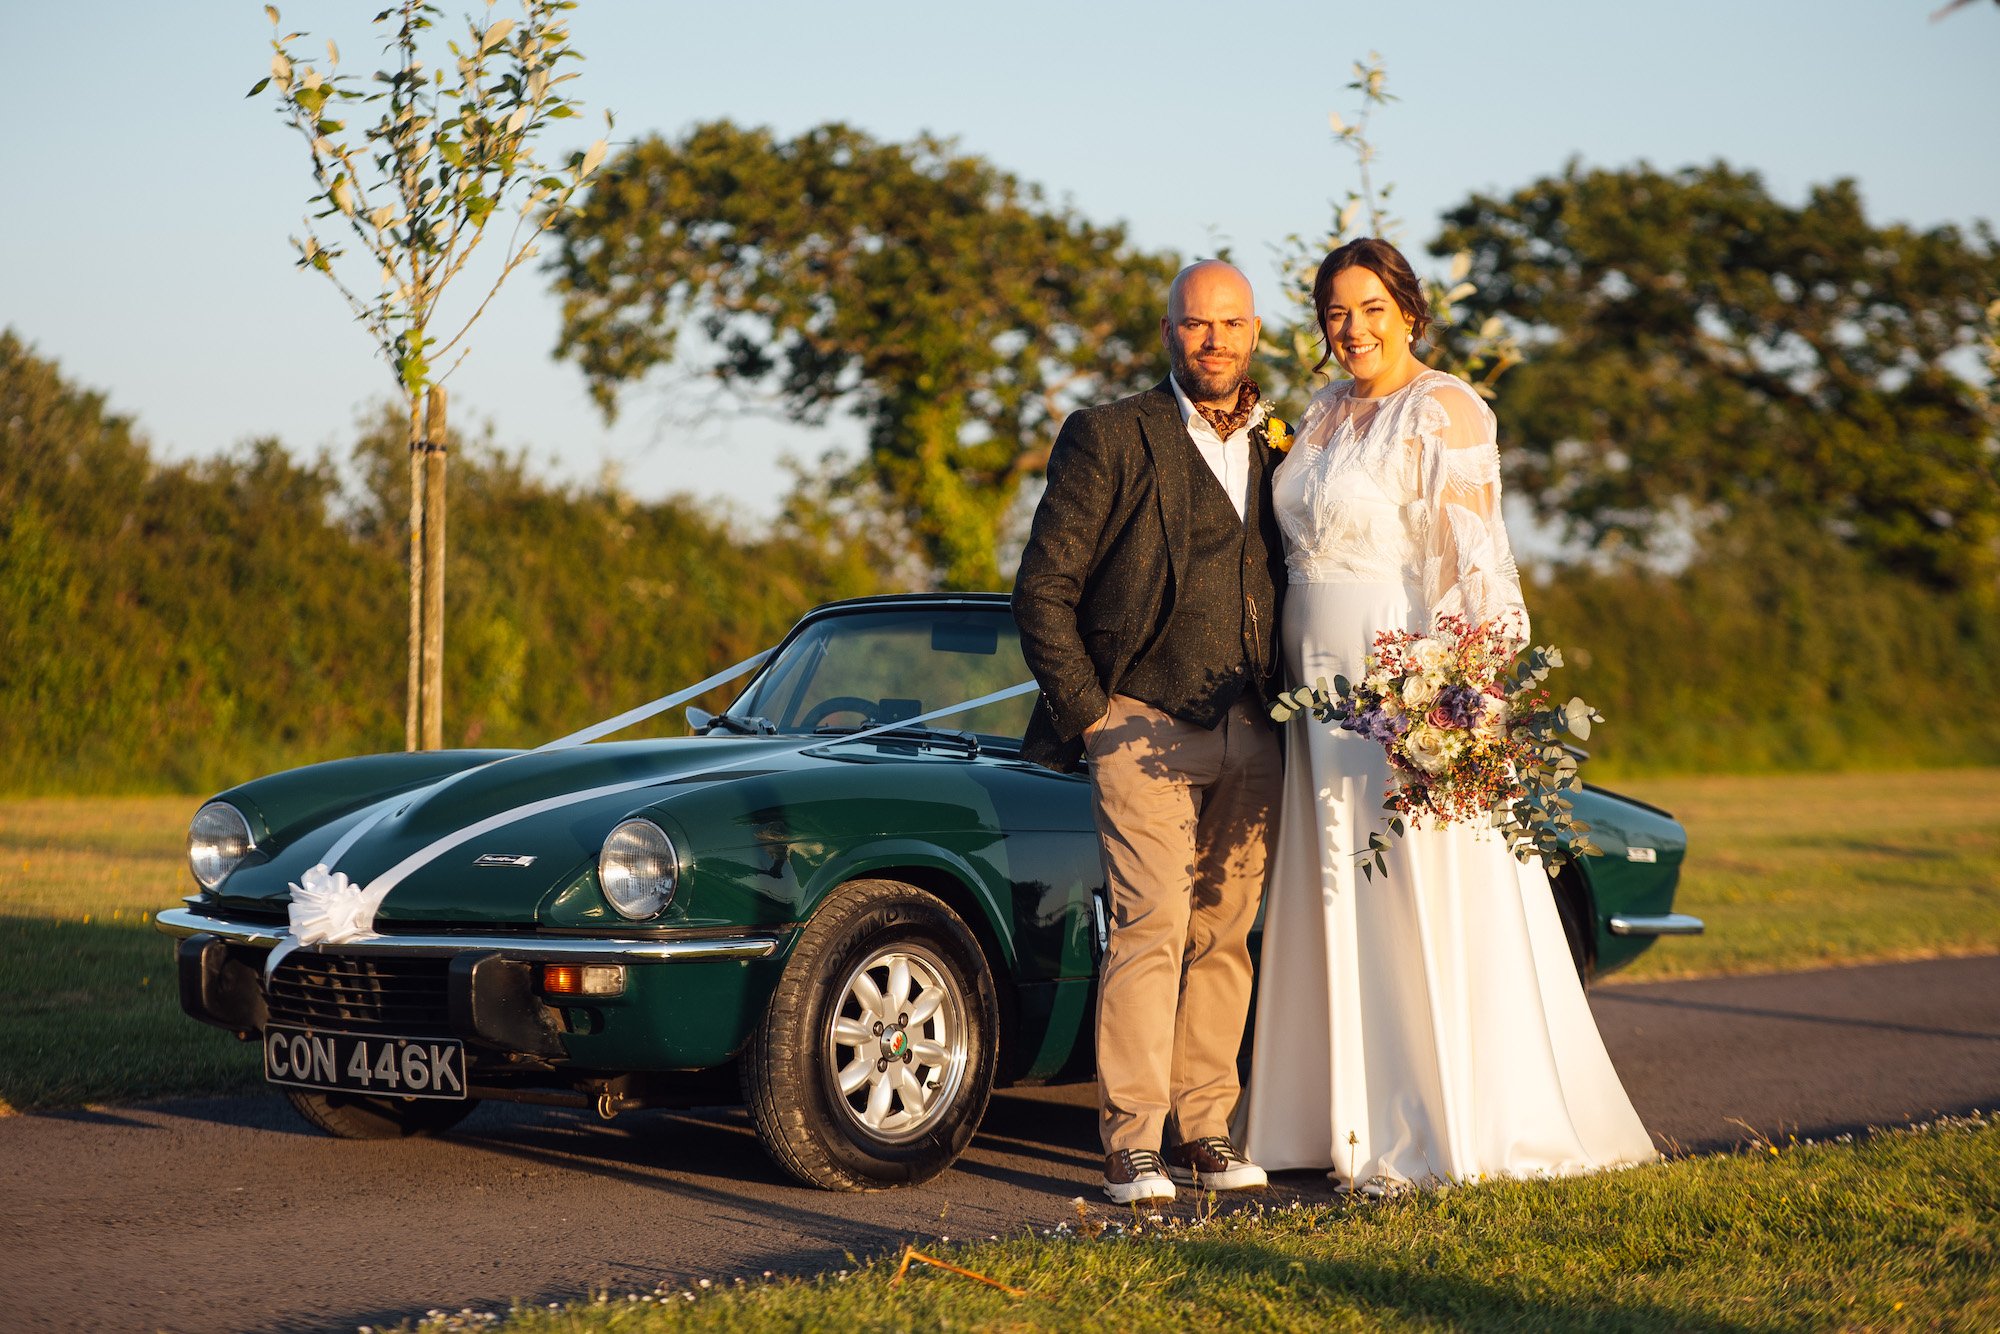 Beautiful bride Hannah wore the Thea wedding dress and Maple Capelet by Halfpenny London